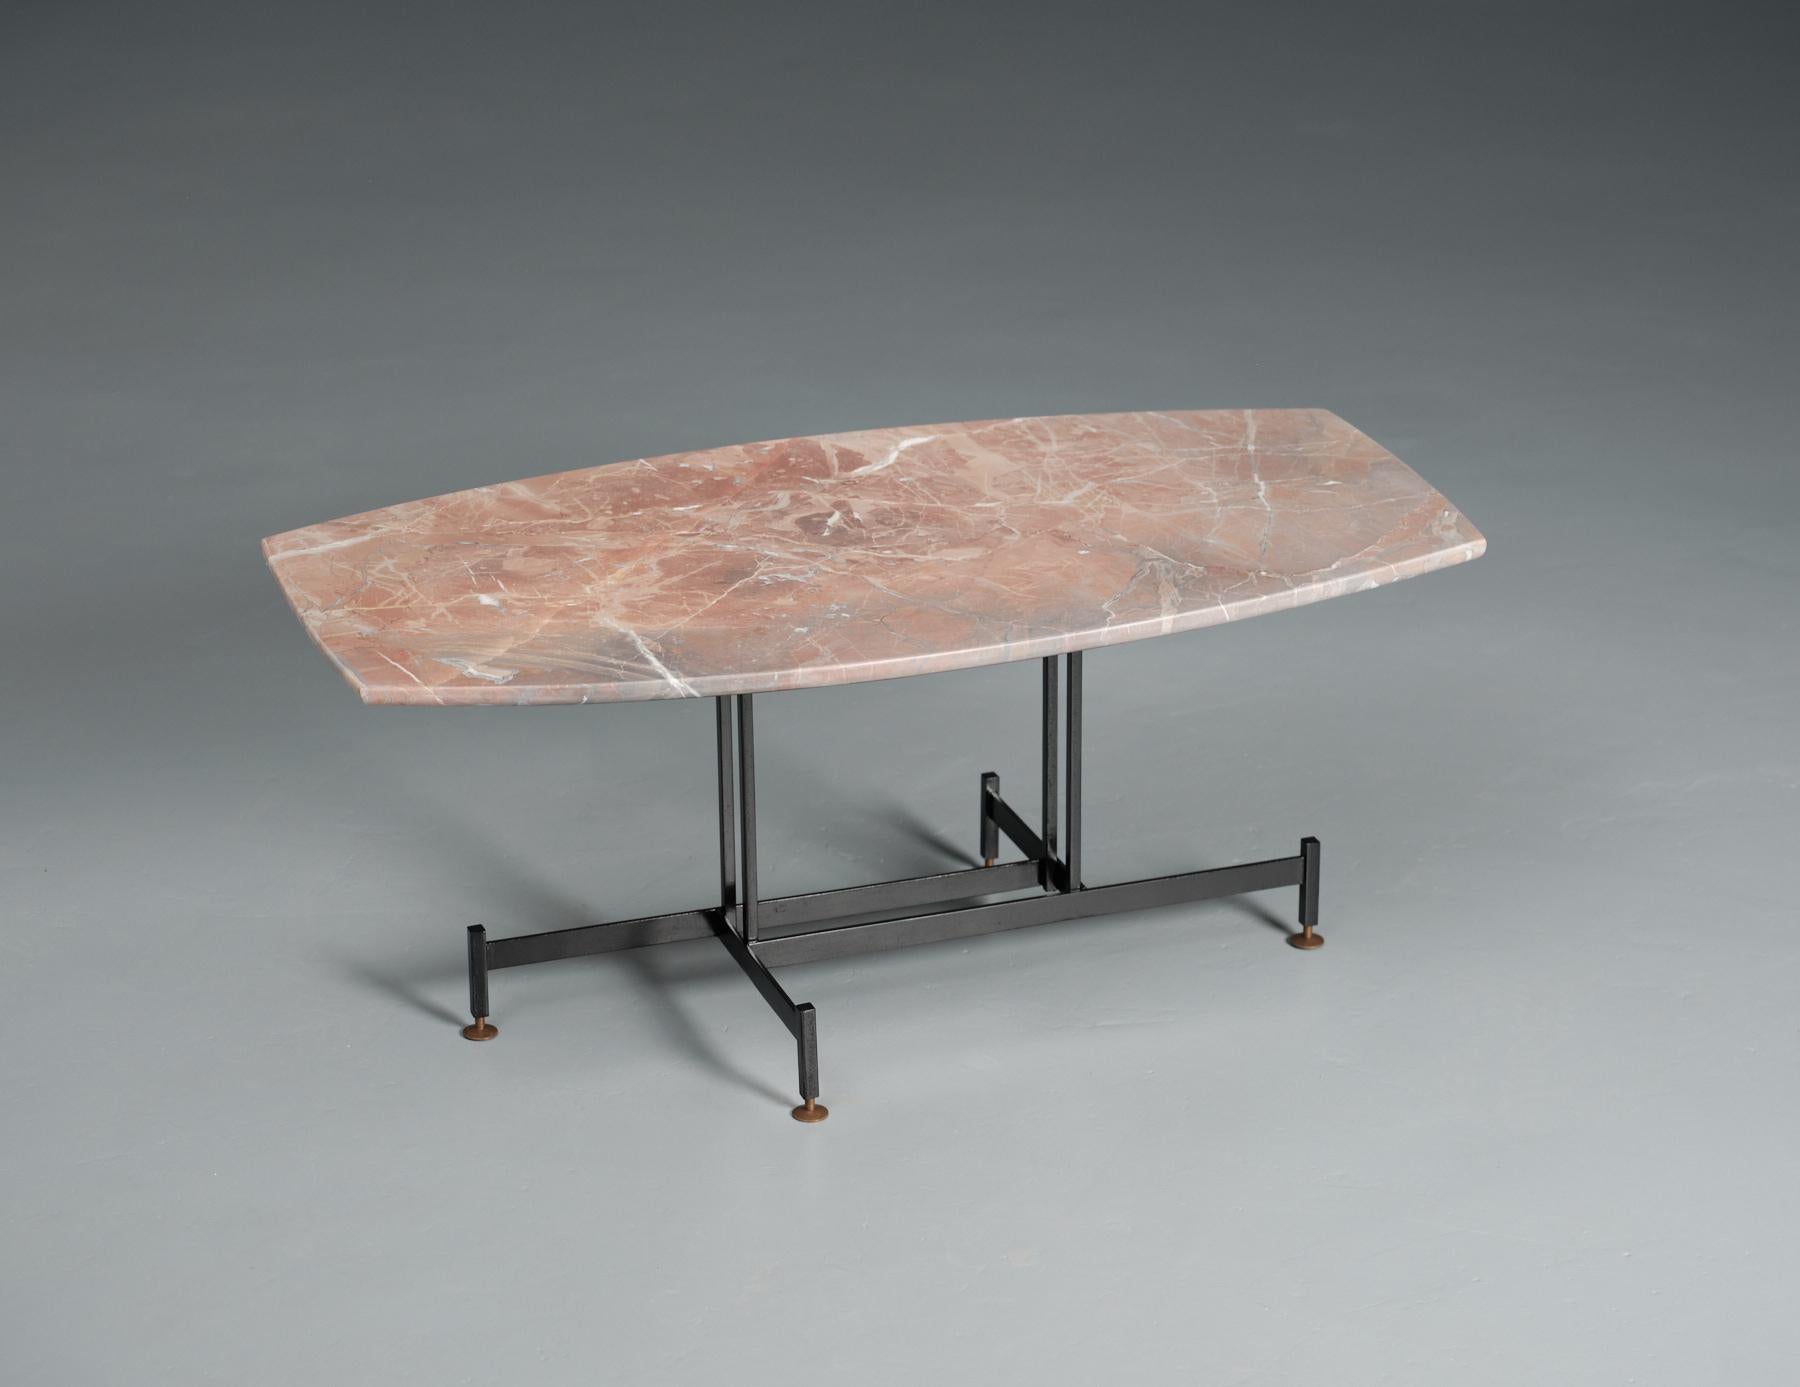 Brass Midcentury Vintage Coffee Table with Reddish-Gray Marble Top and Geometric Iron  For Sale